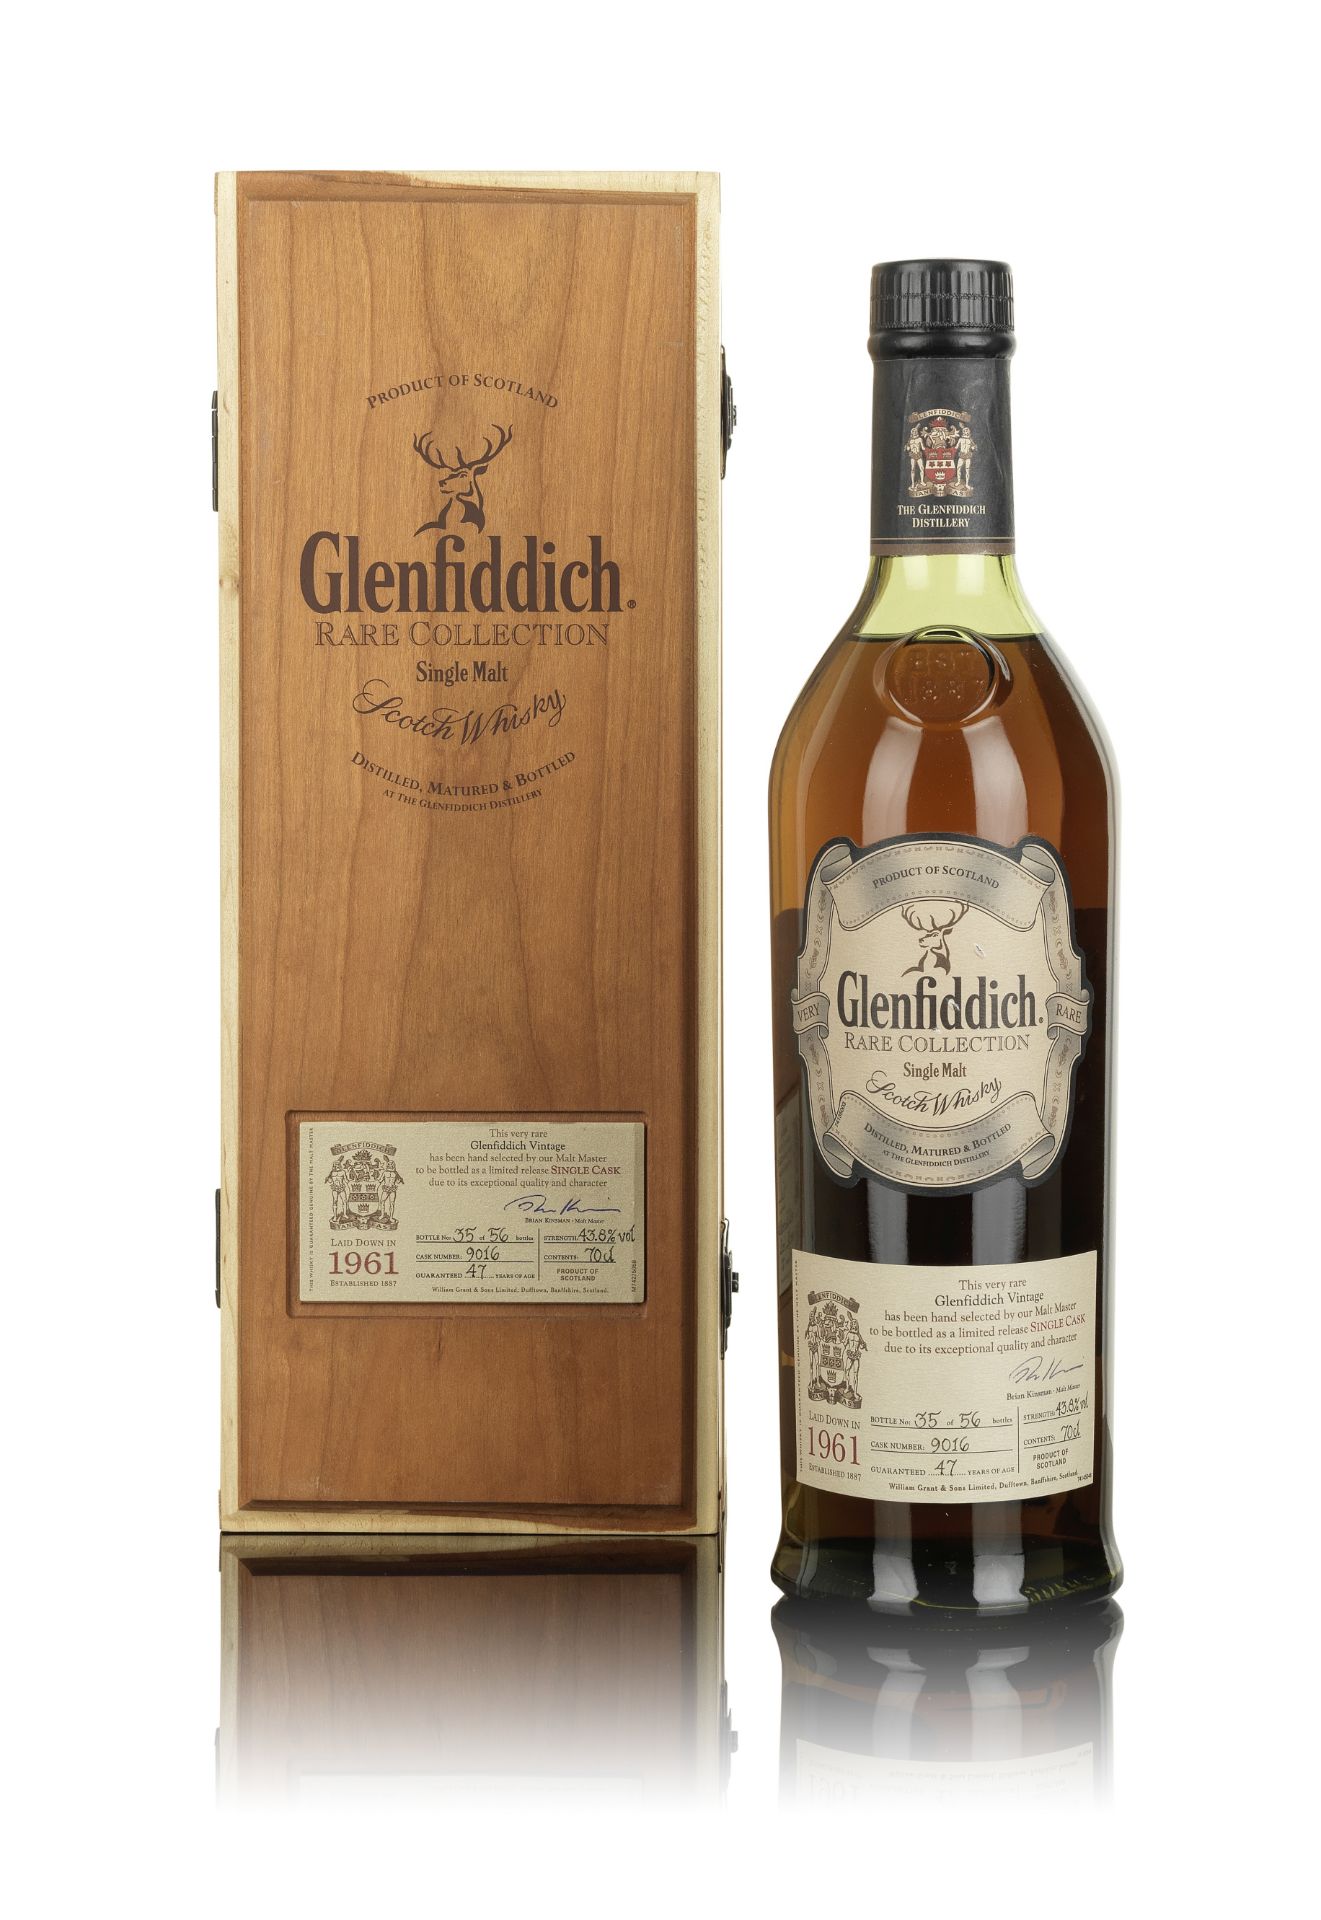 Glenfiddich Rare Collection-47 year old-1961